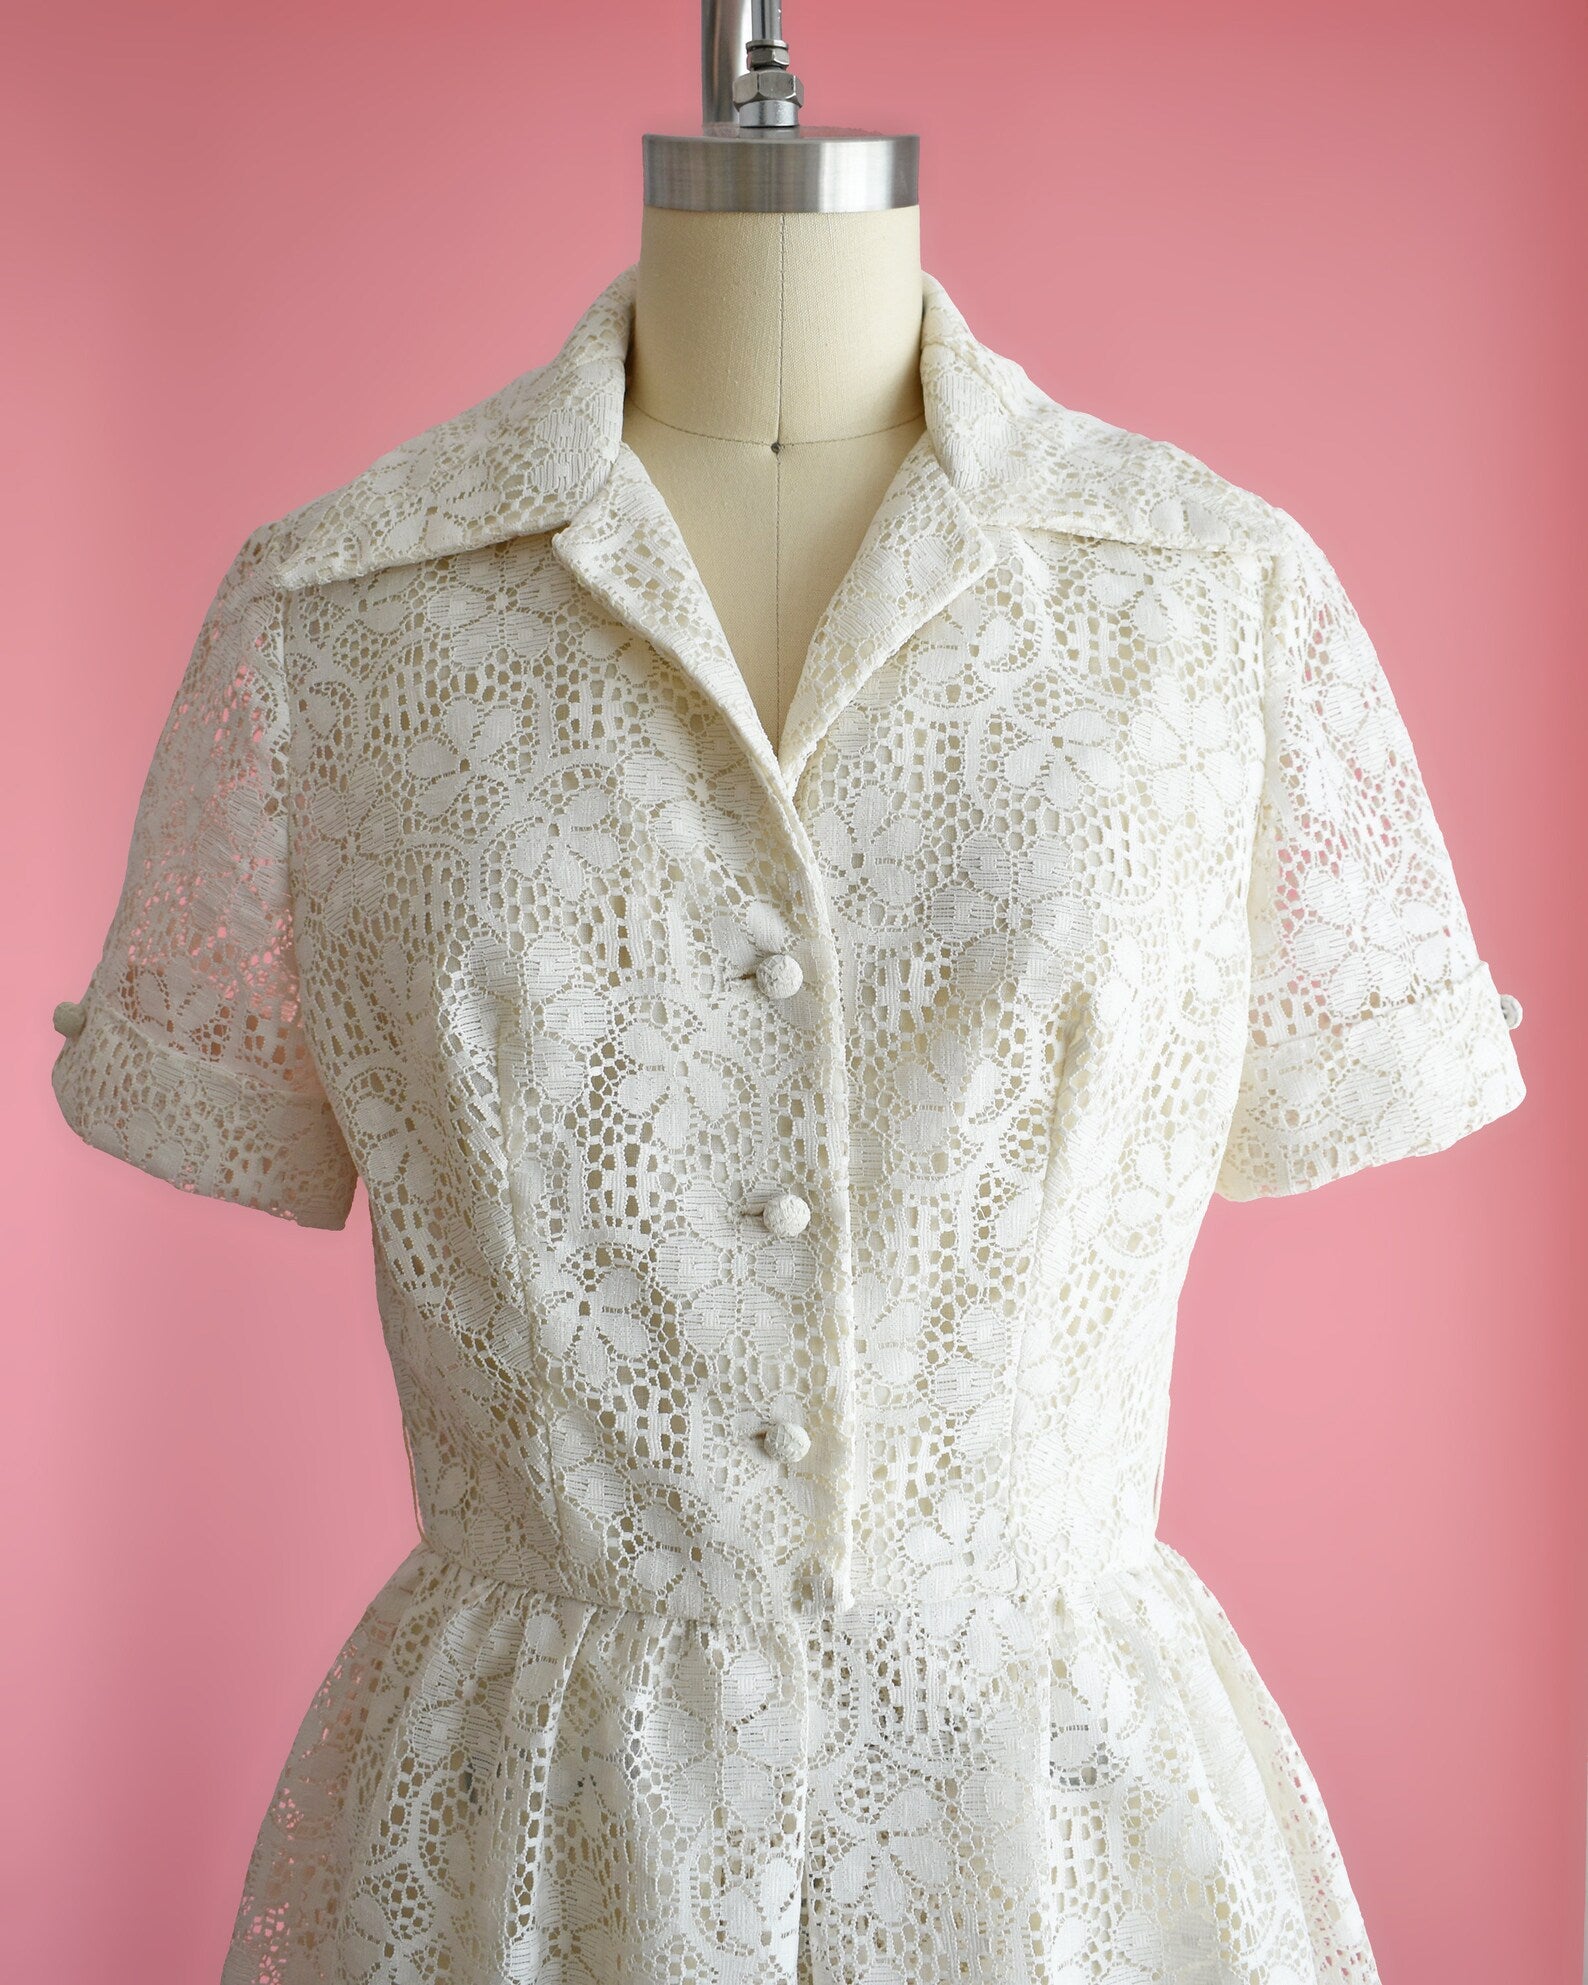 Close up of the bodice of a vintage cream floral lace dress with collared neckline, short sleeves, and button front on a dress form set on a pink background